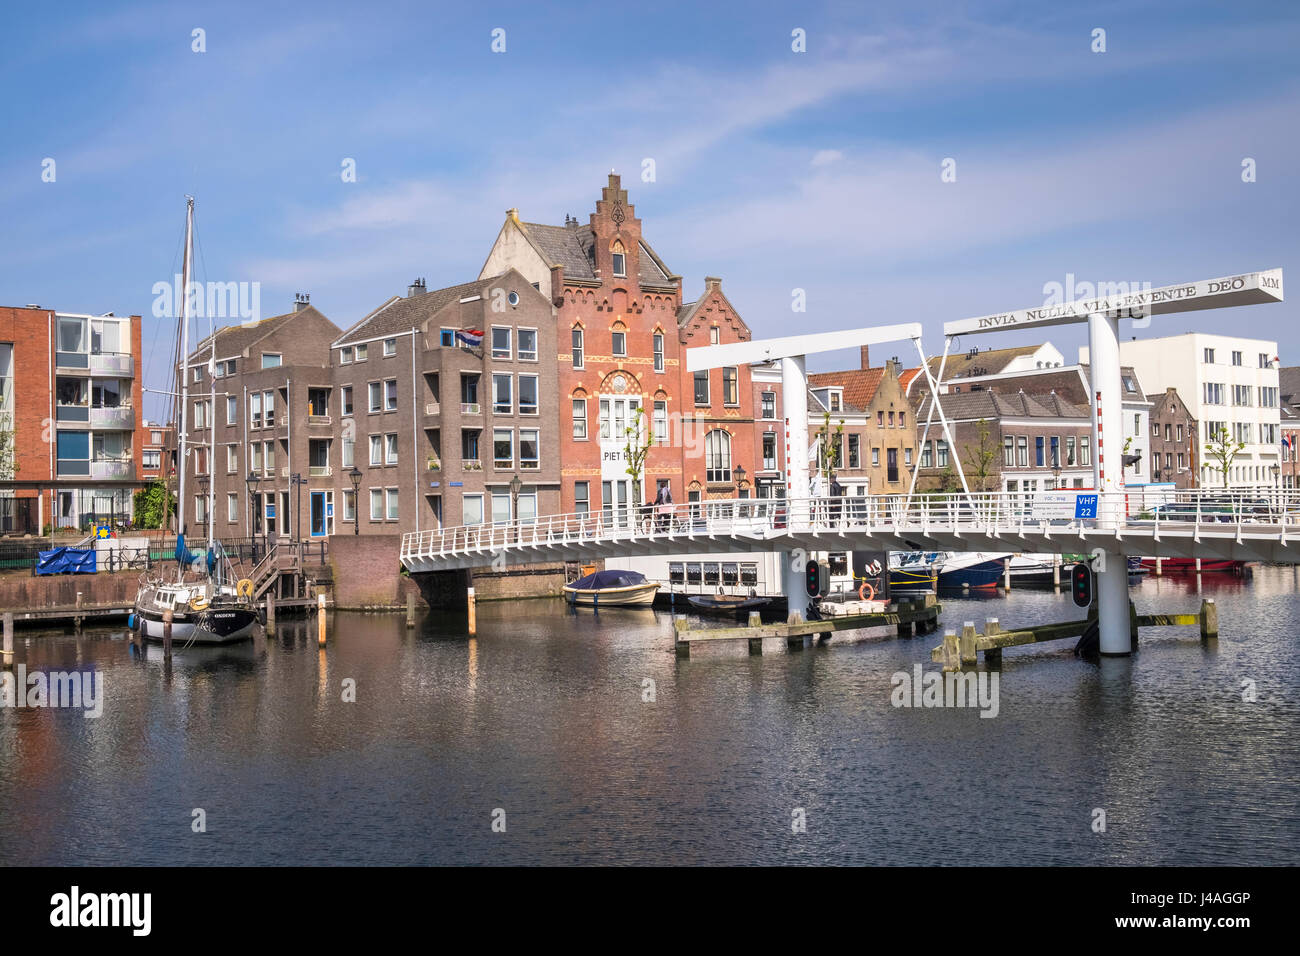 Boats and traditional dutch architecture in the historic area of Delfshaven, Rotterdam, The Netherlands. Stock Photo